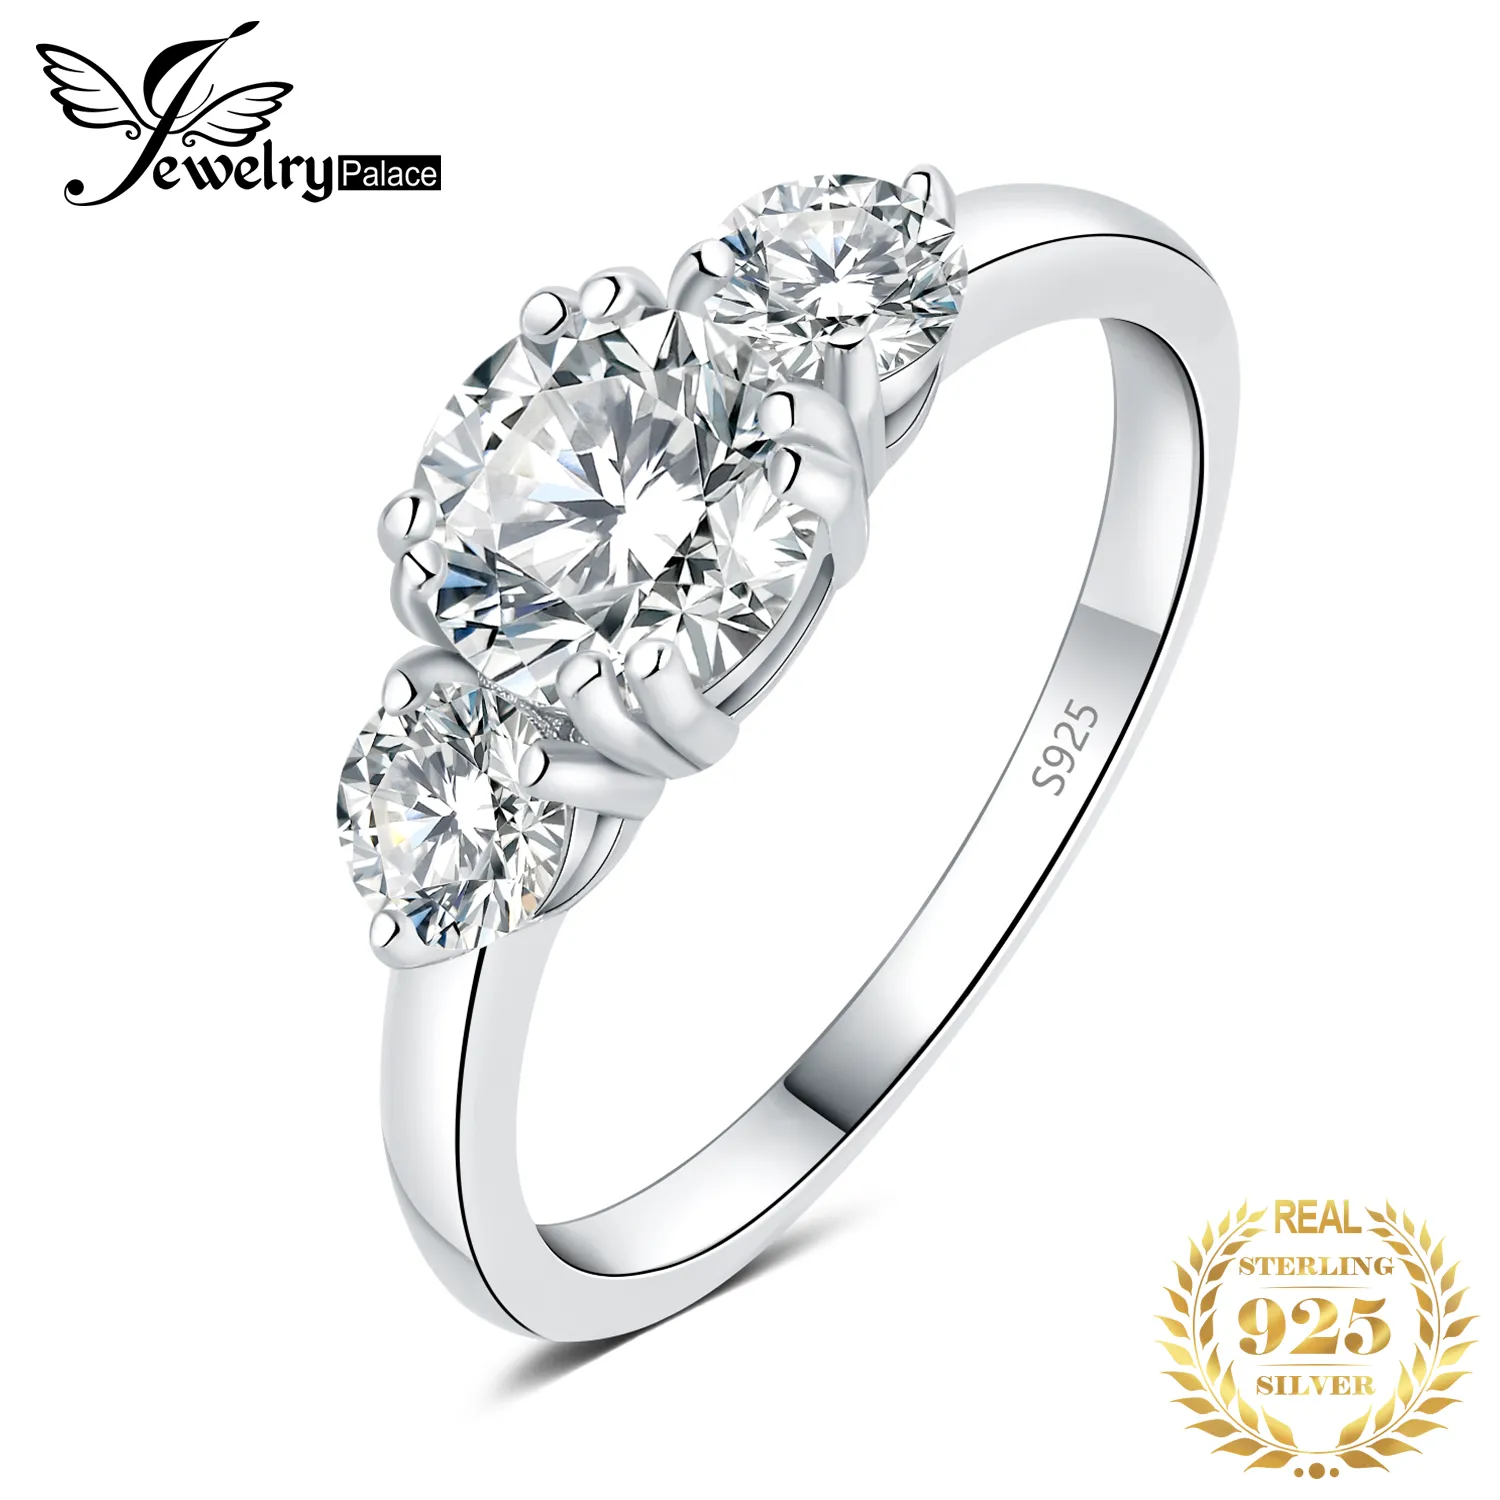 JewelryPalace Moissanite D Couleur 1.4ct 925 Sterling Silver 3 Stone Wedding Engagement Ring for Woman Yellow Rose Gold Plated